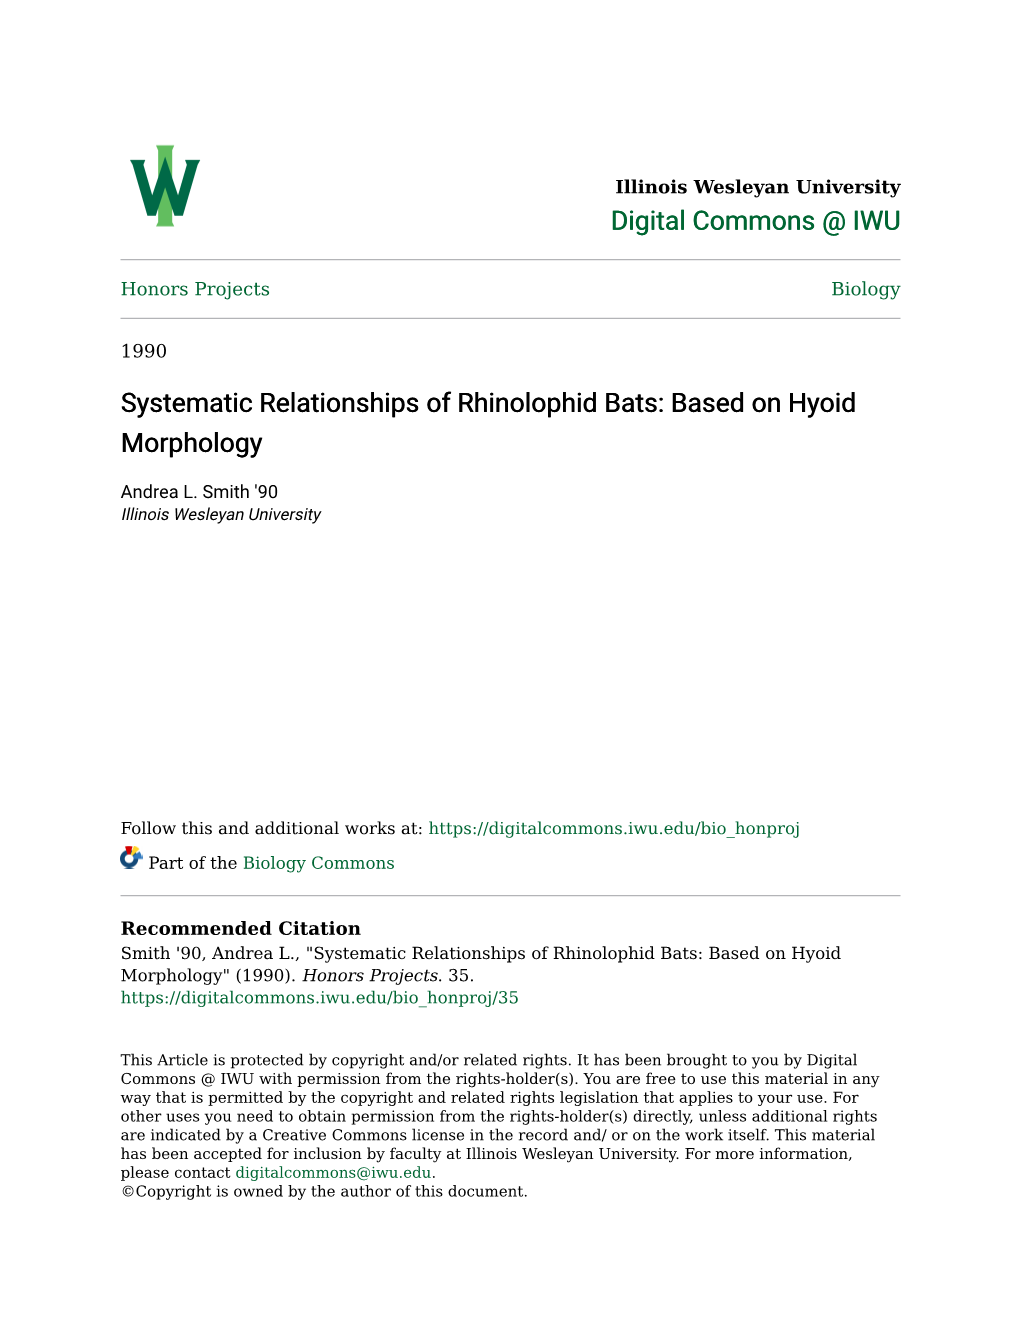 Systematic Relationships of Rhinolophid Bats: Based on Hyoid Morphology